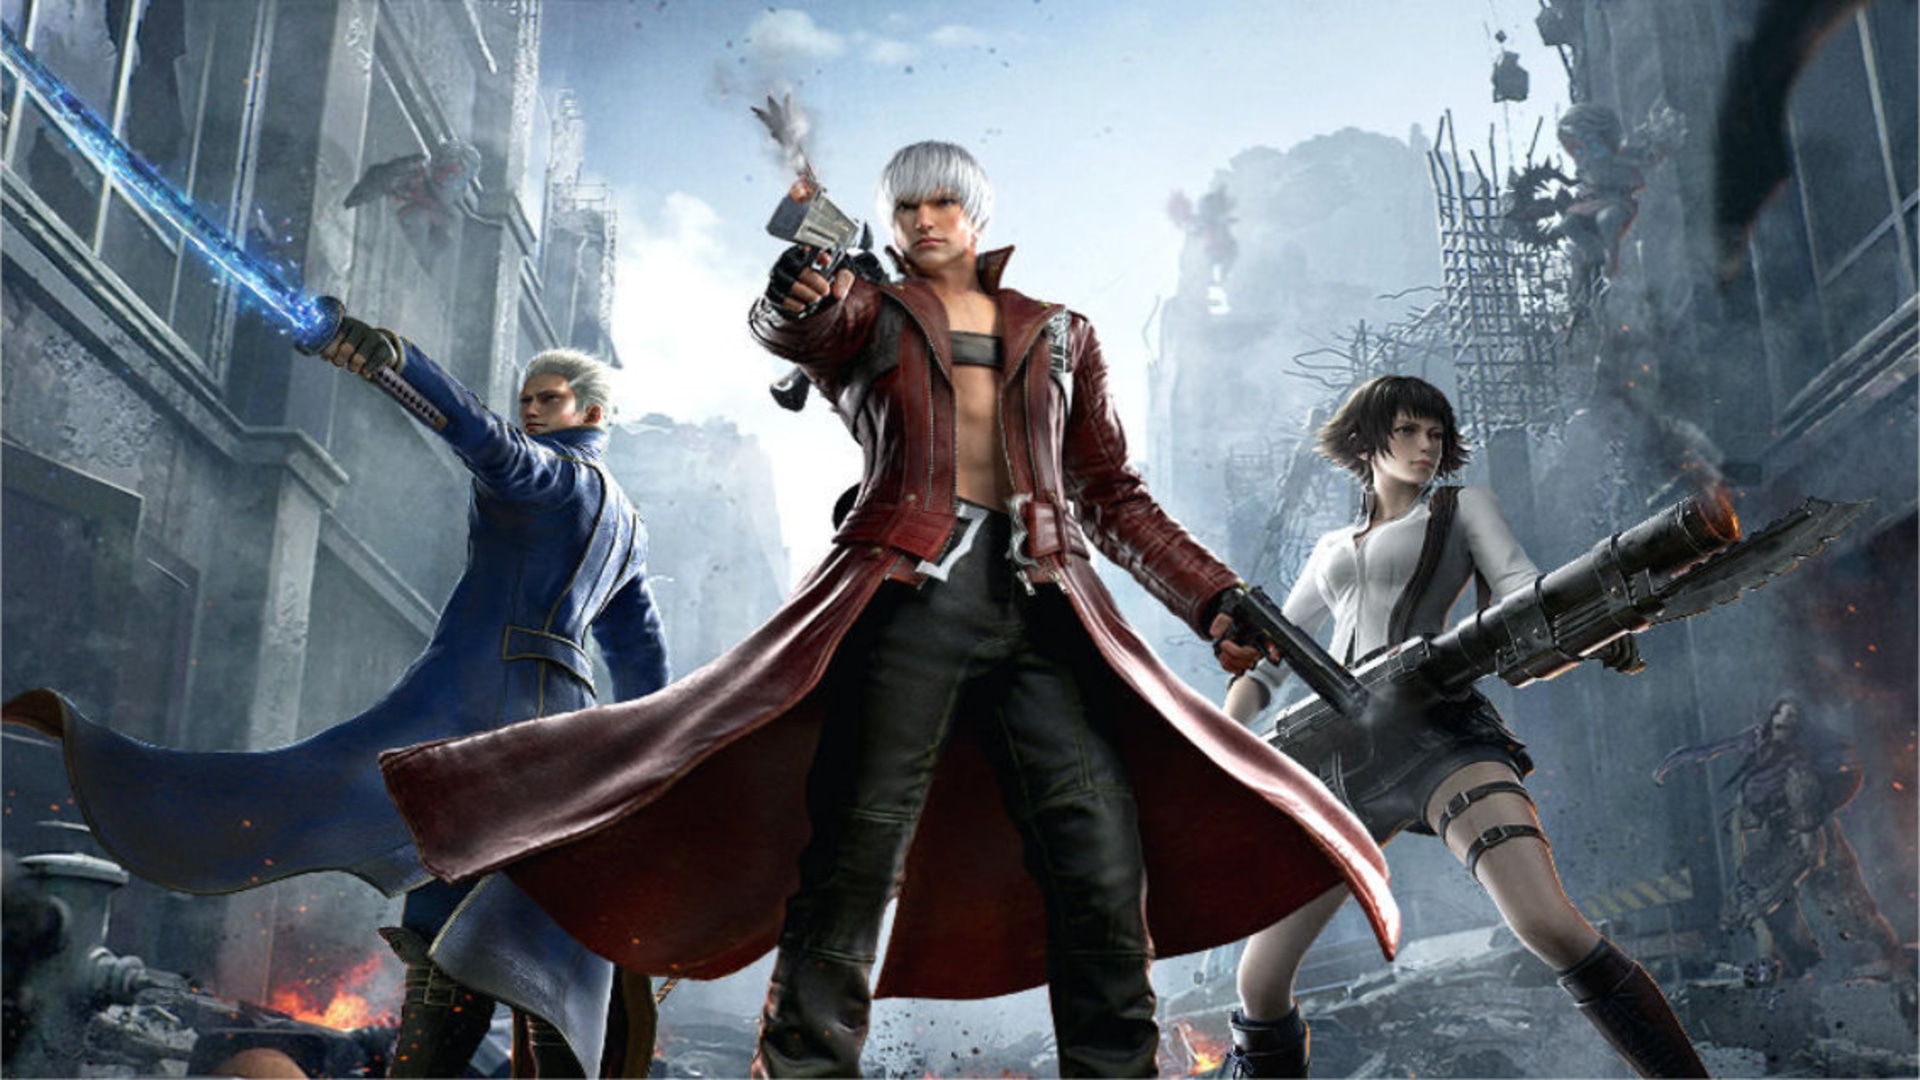 Devil may cry 3 can find steam фото 54